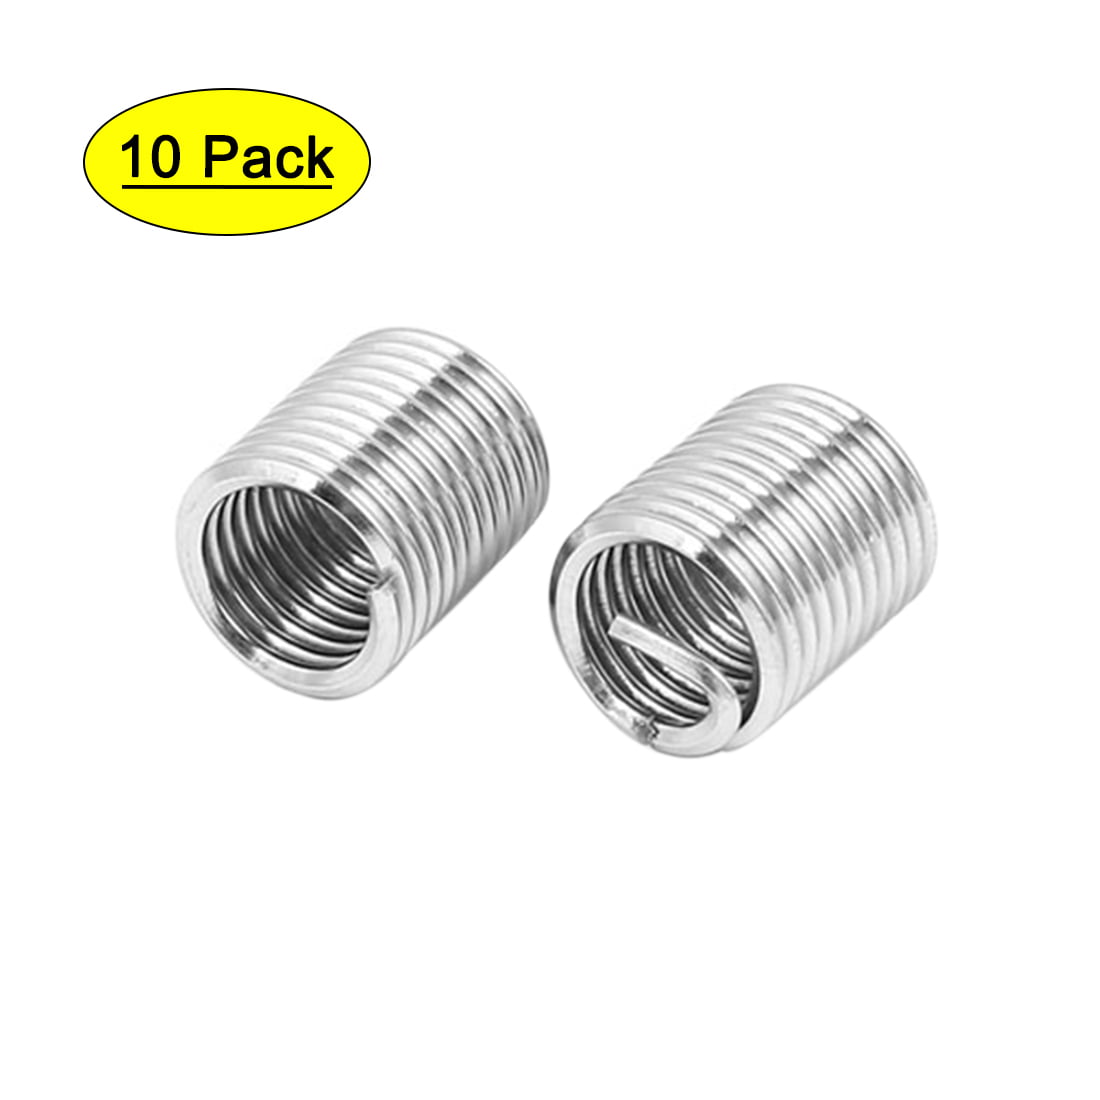 200 Cylinder Head Cap Threaded Inserts galvanised steel m6 32m6 TP-CM L by SACTO 